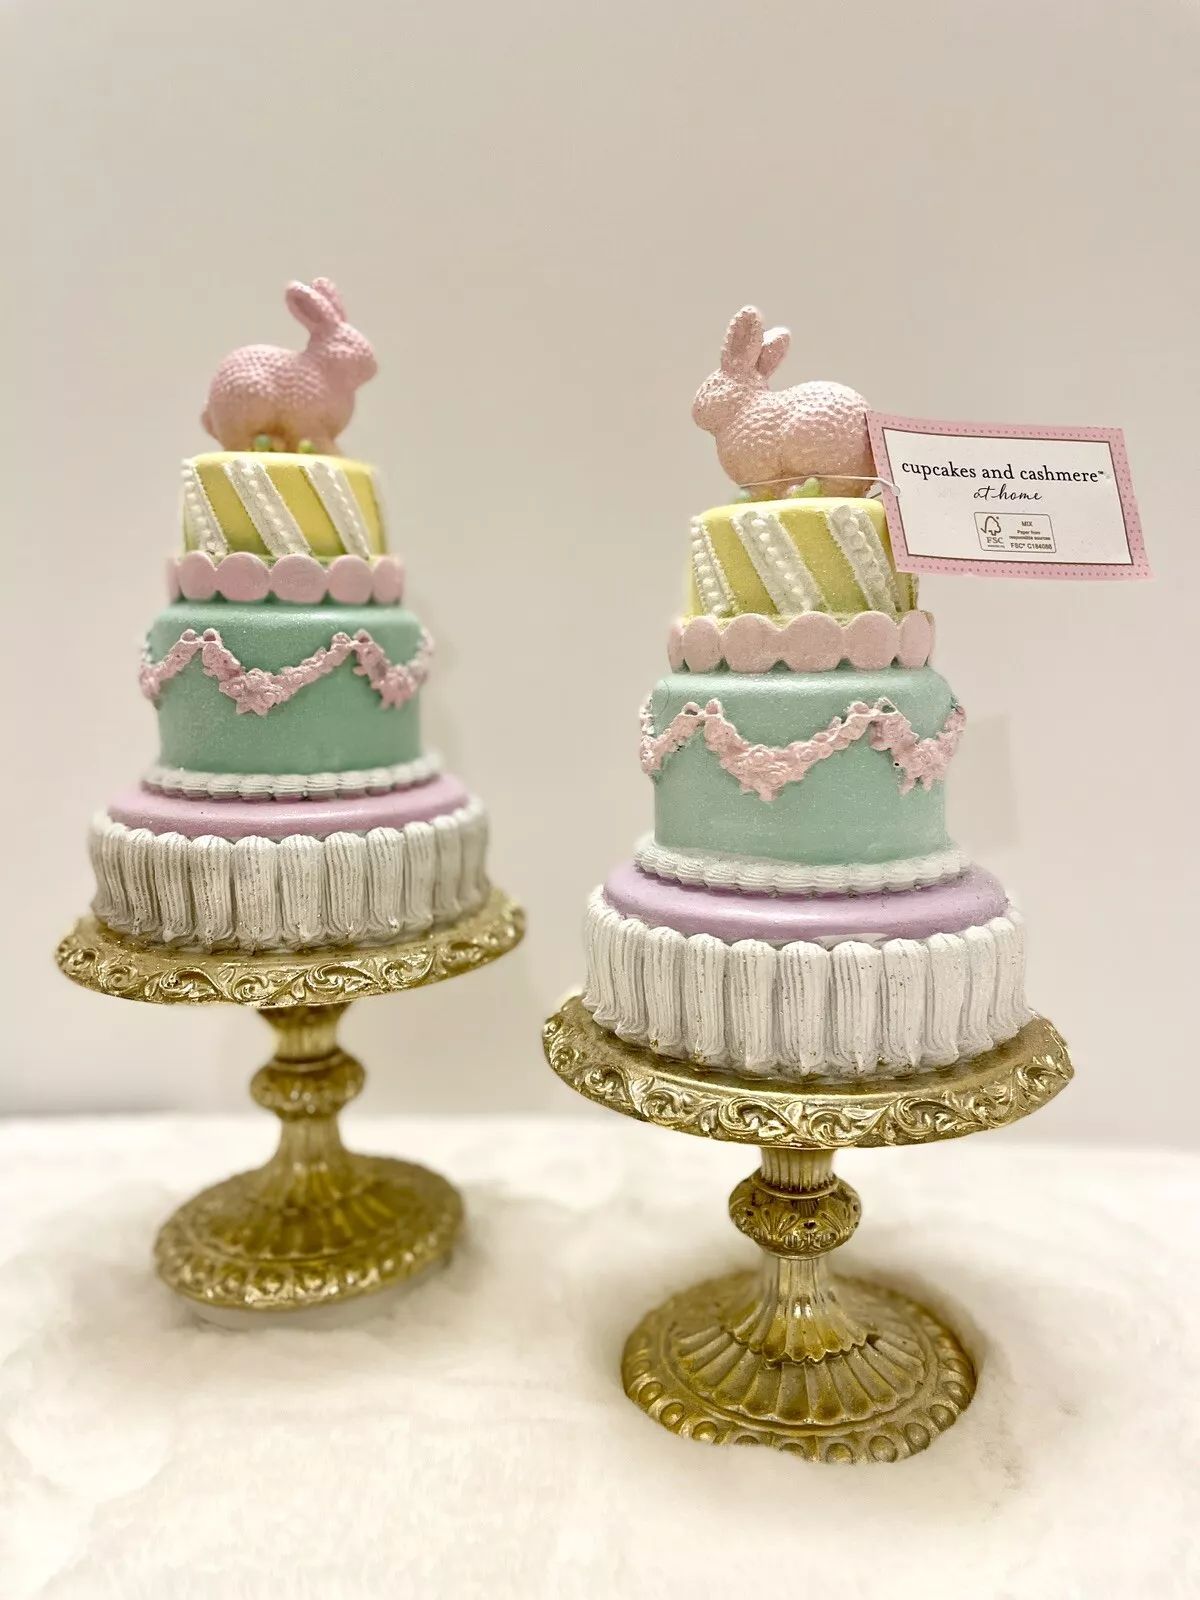 Cupcakes and Cashmere Set of 2 Easter Tiered Cake Gold Pedestal Bunny Decor  | eBay | eBay US